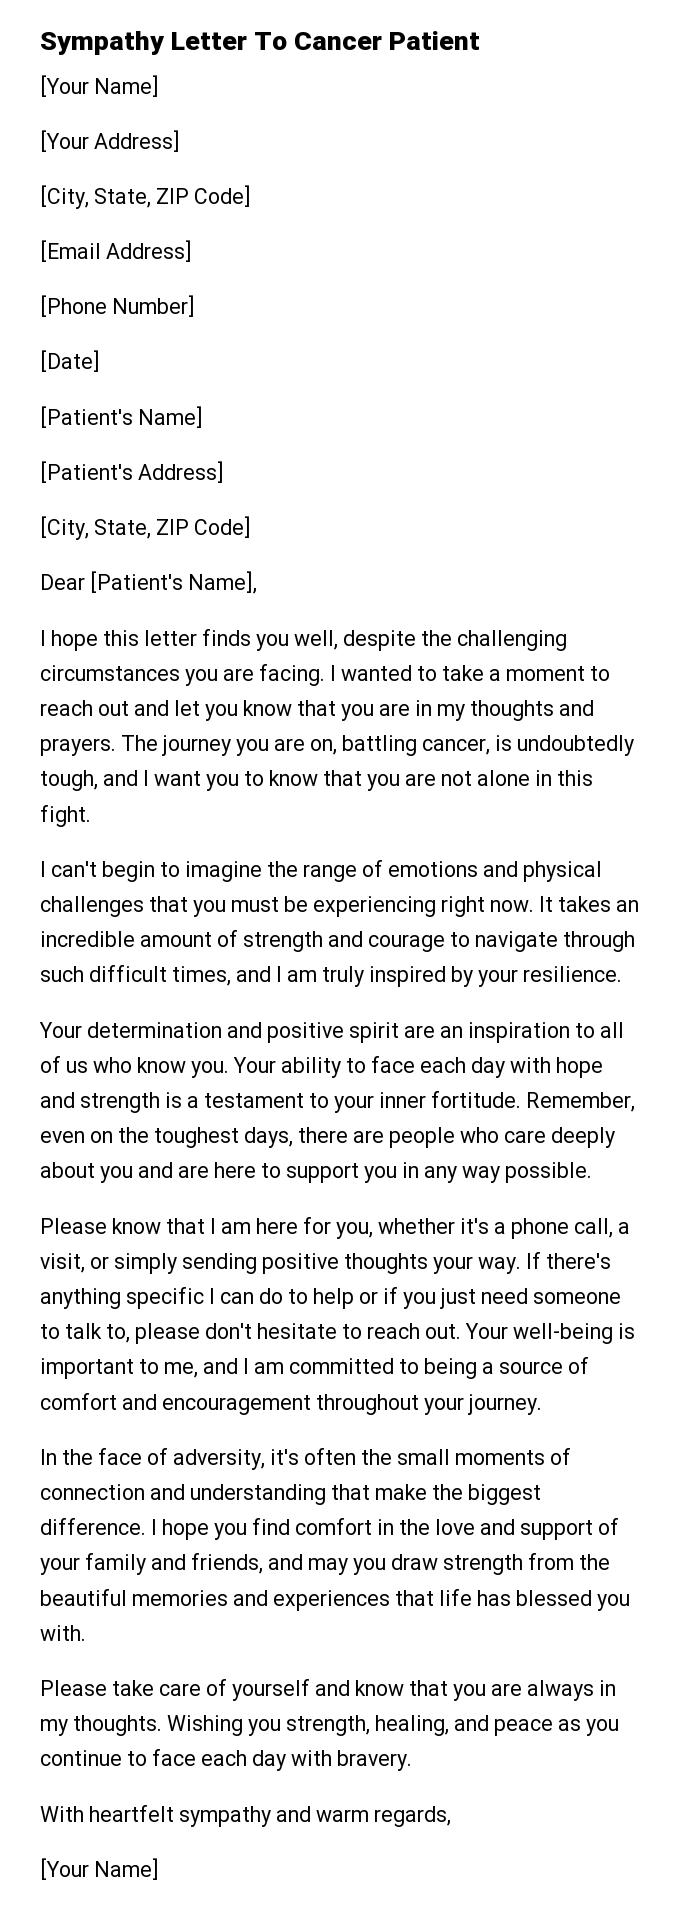 Sympathy Letter To Cancer Patient